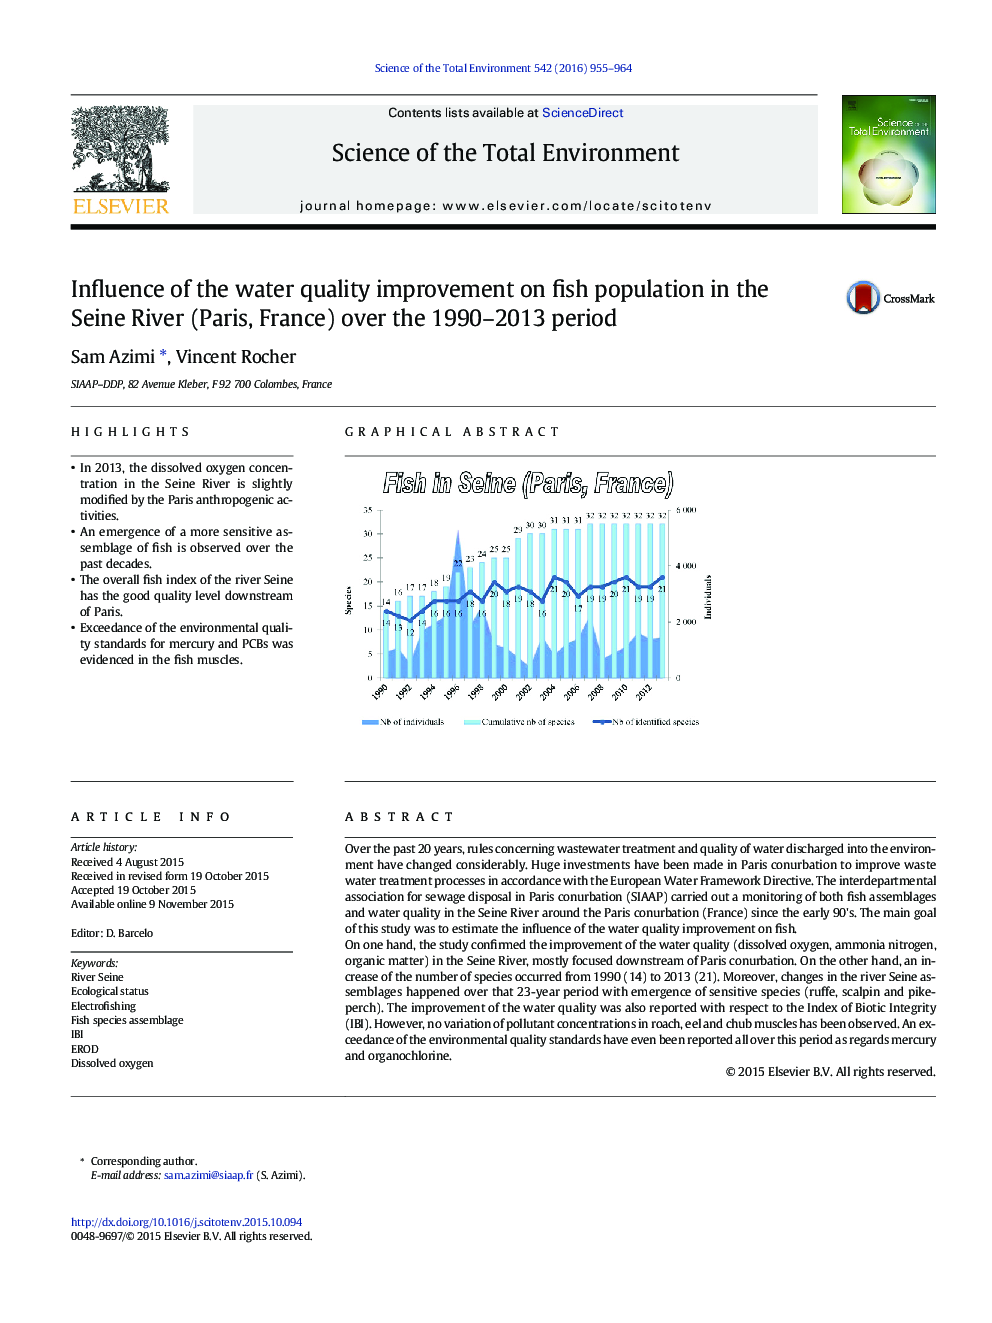 Influence of the water quality improvement on fish population in the Seine River (Paris, France) over the 1990-2013 period